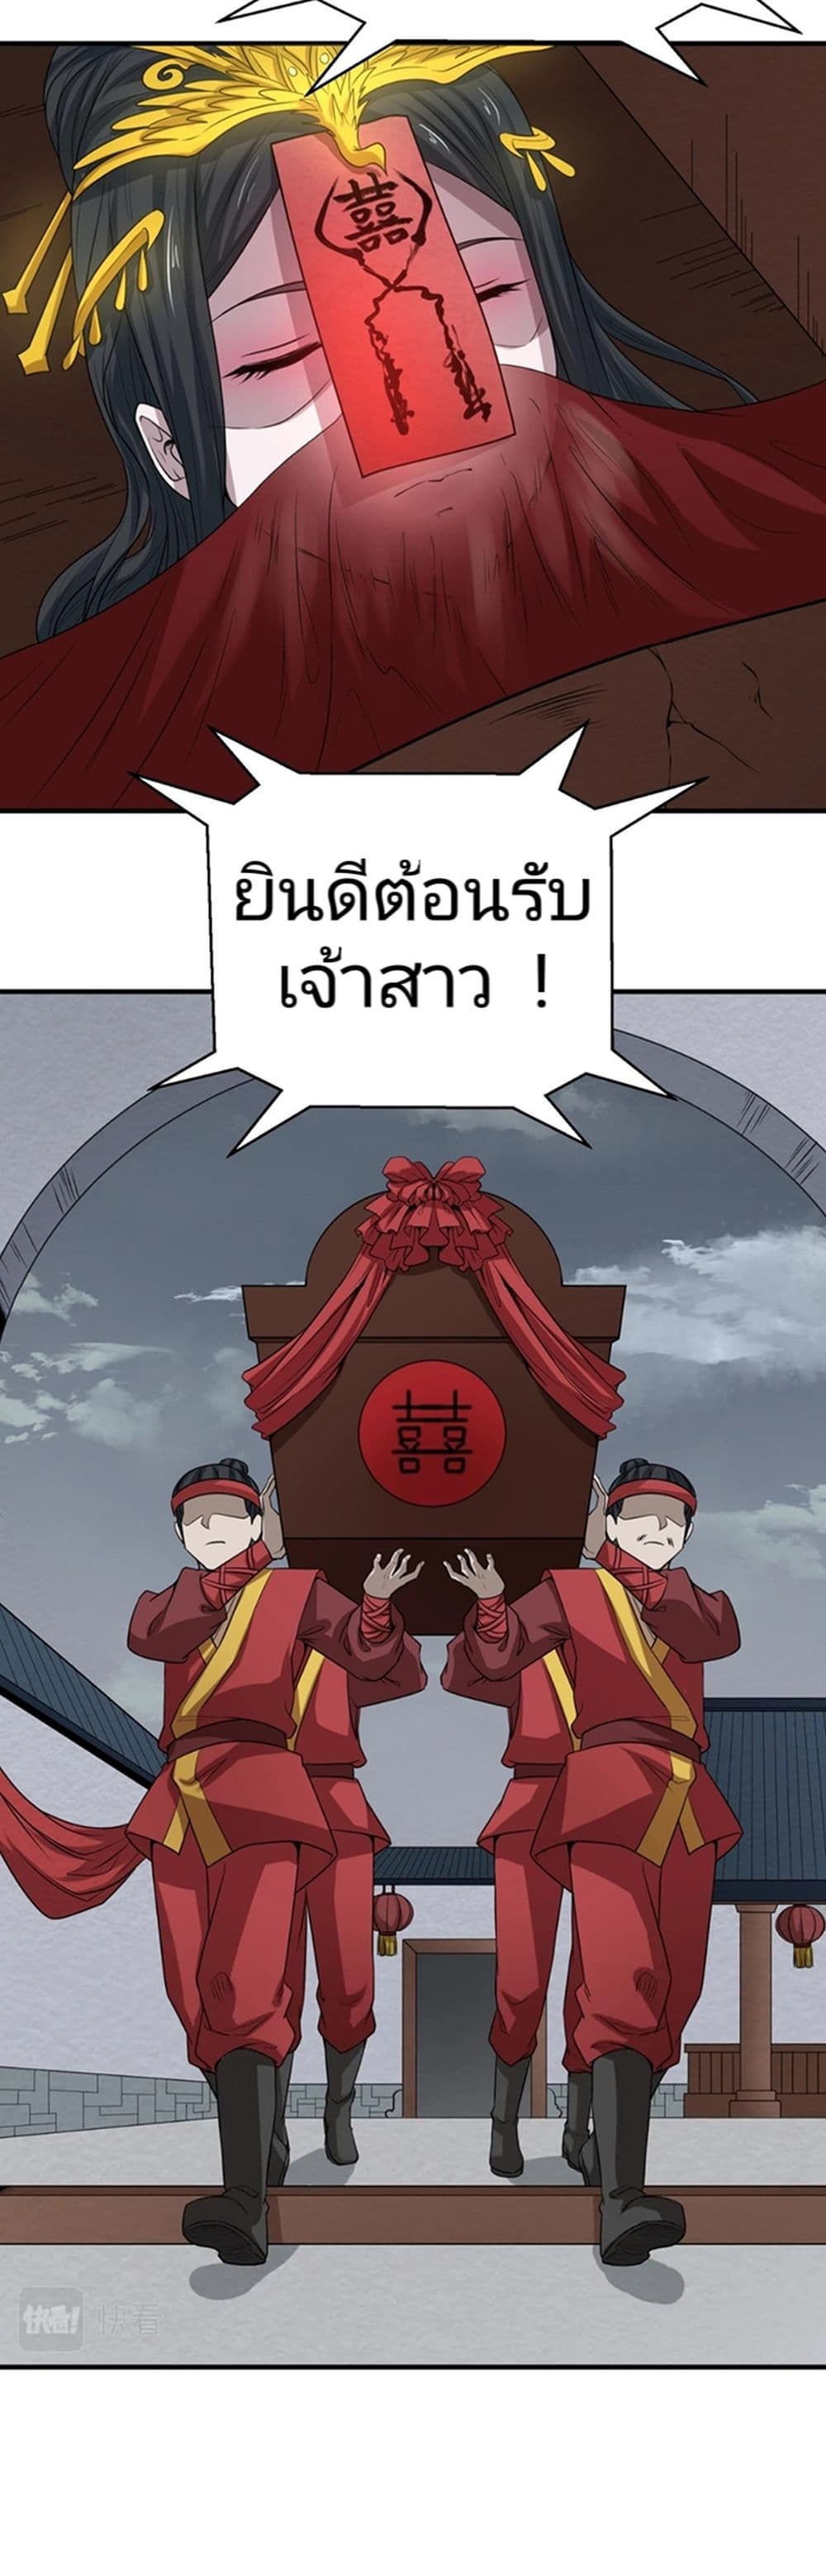 The Age of Ghost Spirits à¸à¸­à¸à¸à¸µà¹ 15 (25)